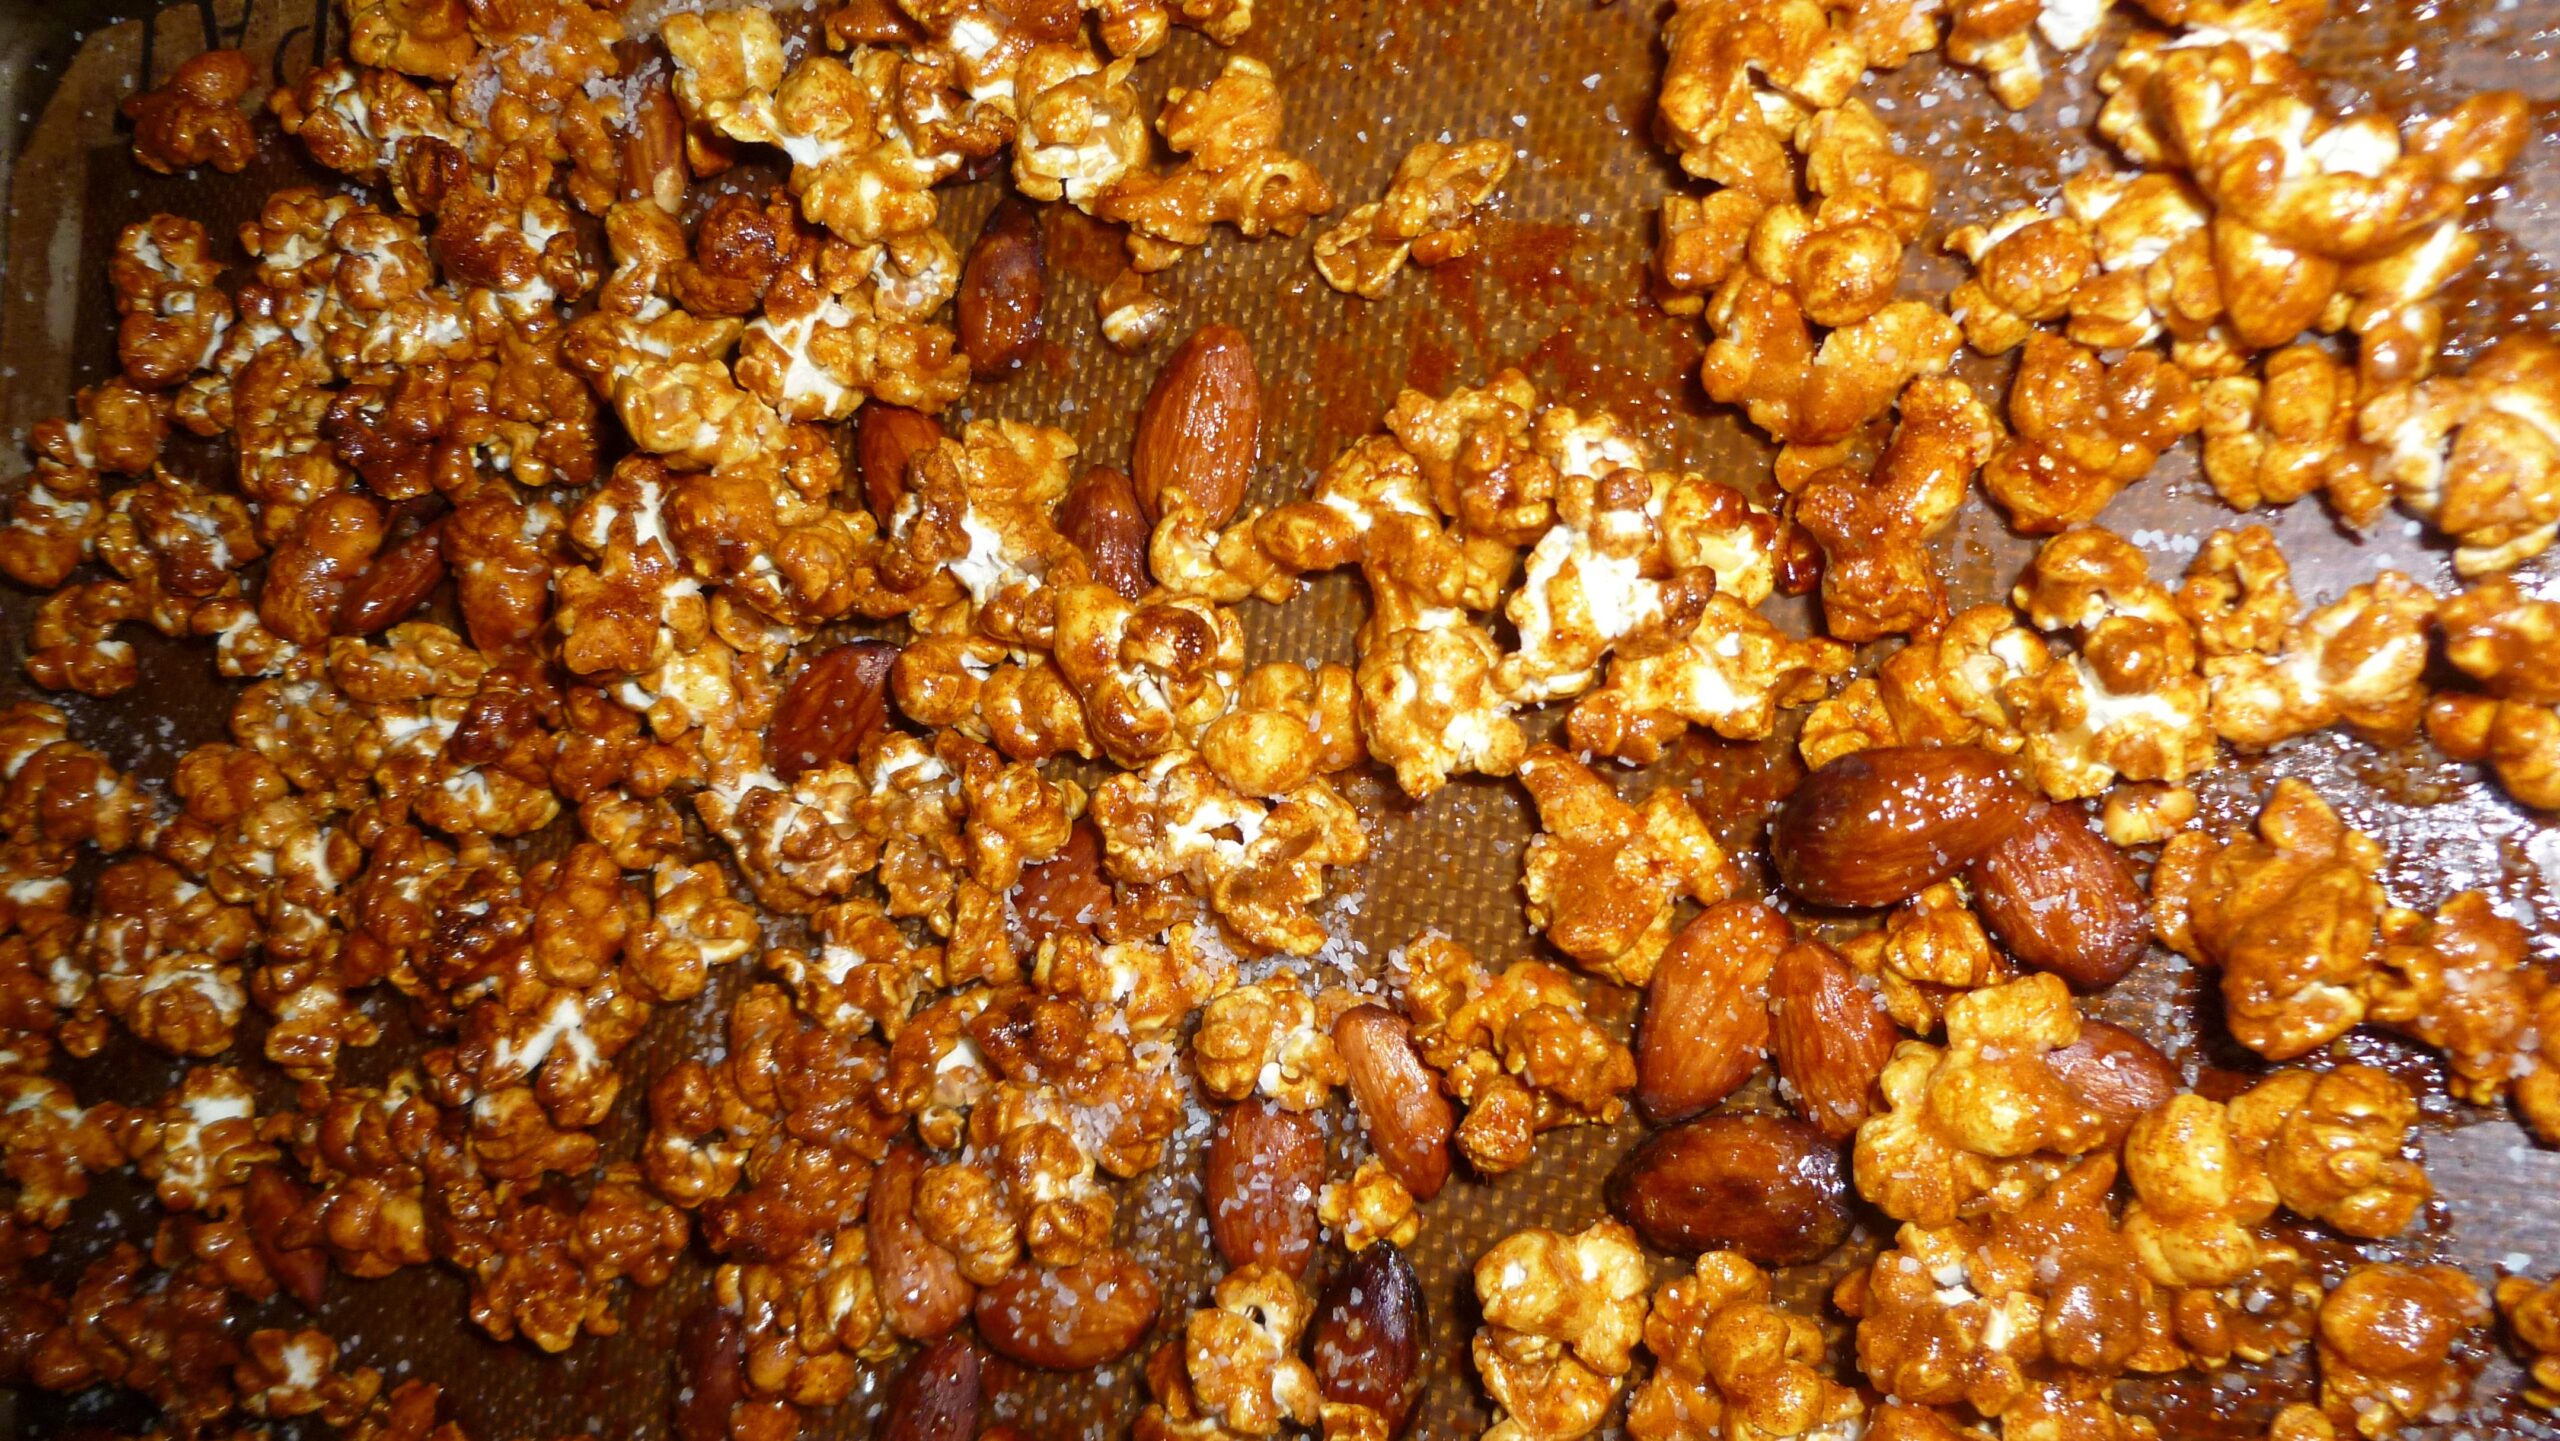  You'll be hooked on the rich coffee flavor and the satisfying crunch of this popcorn.